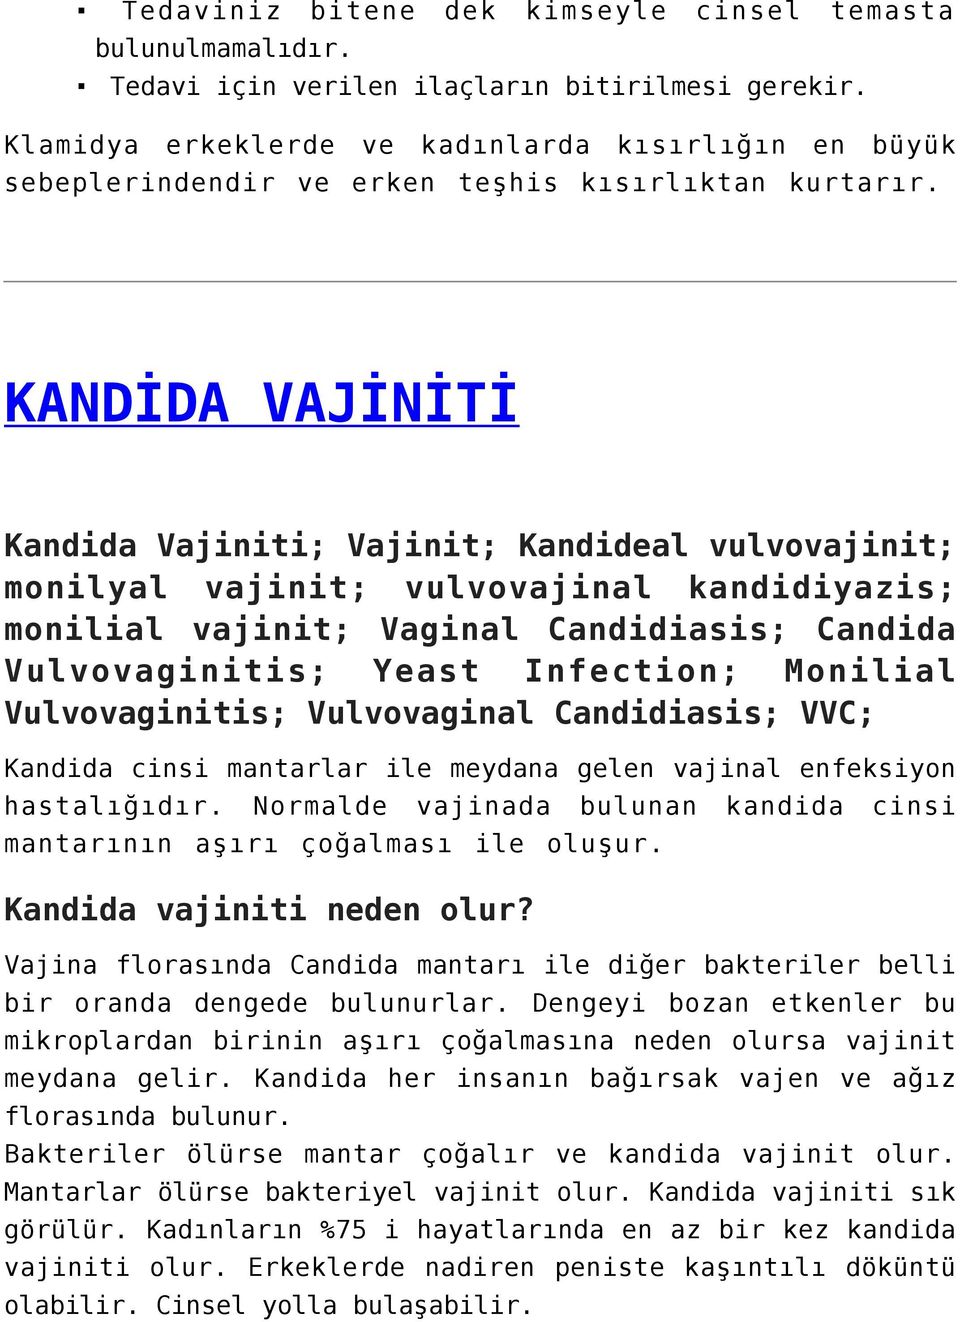 KANDİDA VAJİNİTİ Kandida Vajiniti; Vajinit; Kandideal vulvovajinit; monilyal vajinit; vulvovajinal kandidiyazis; monilial vajinit; Vaginal Candidiasis; Candida Vulvovaginitis; Yeast Infection;